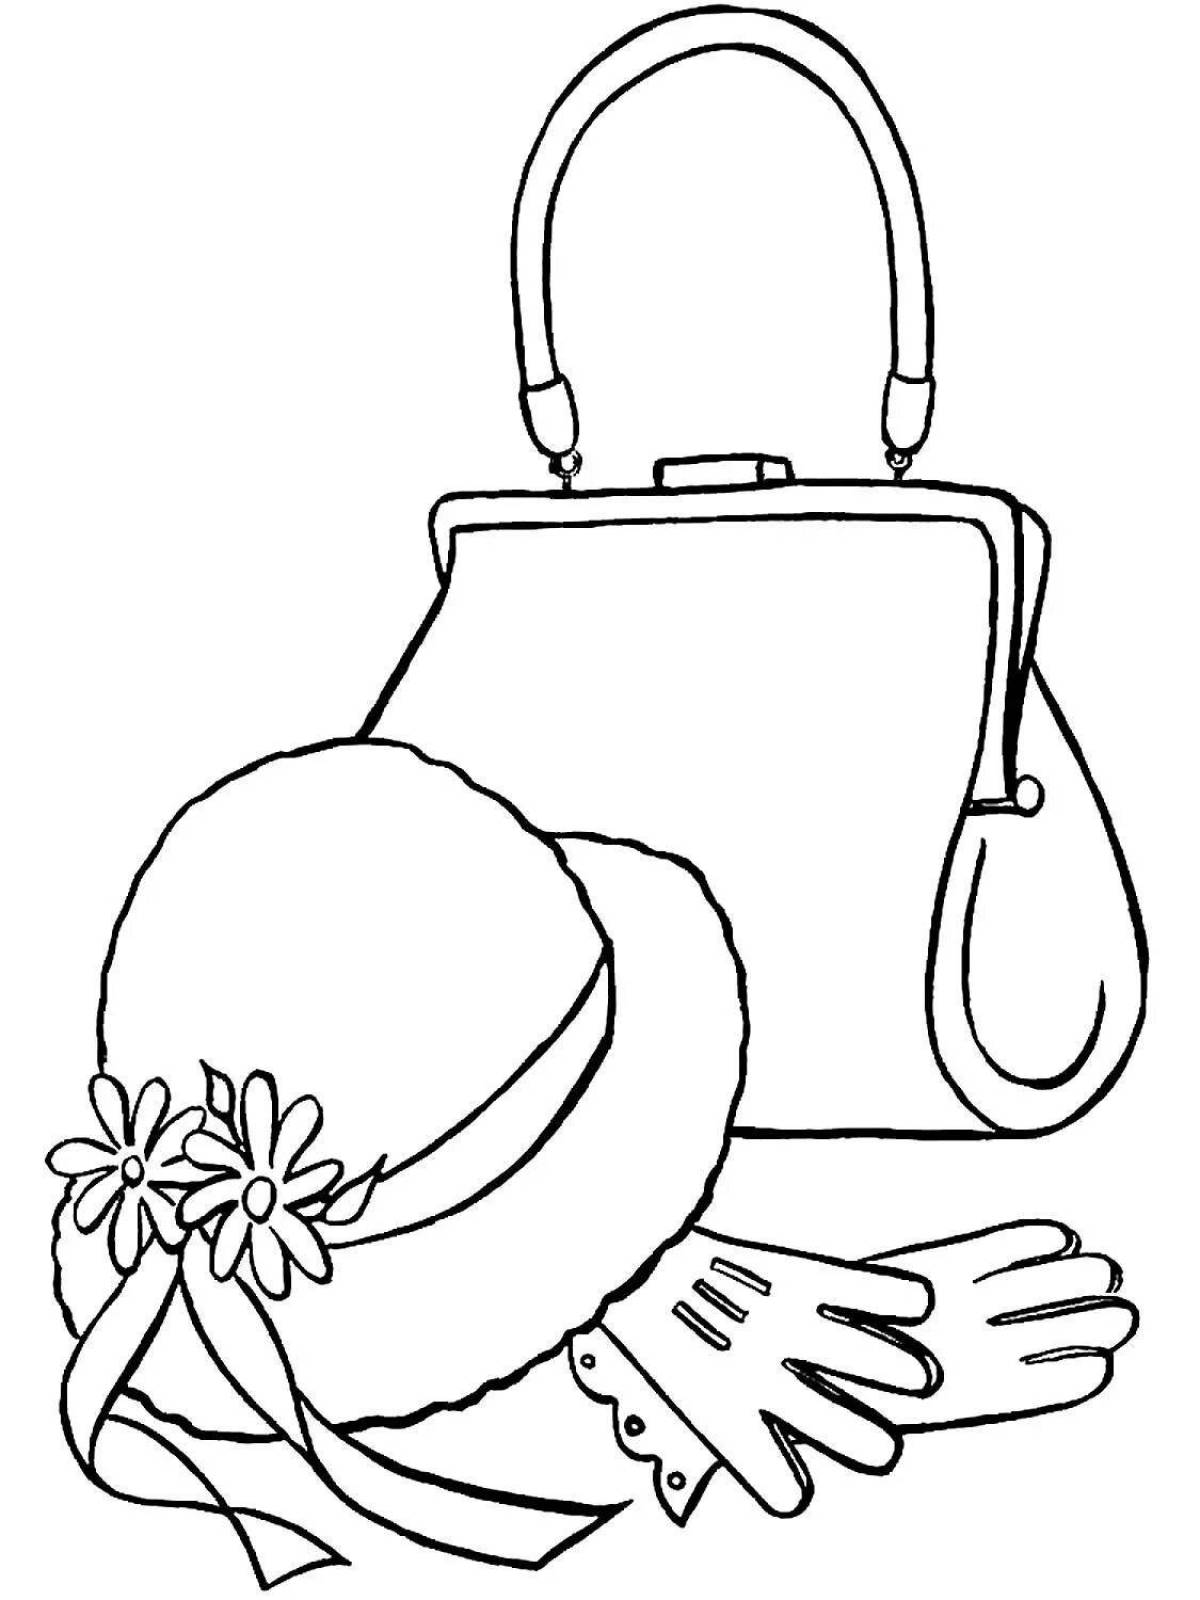 Great coloring pages for juniors